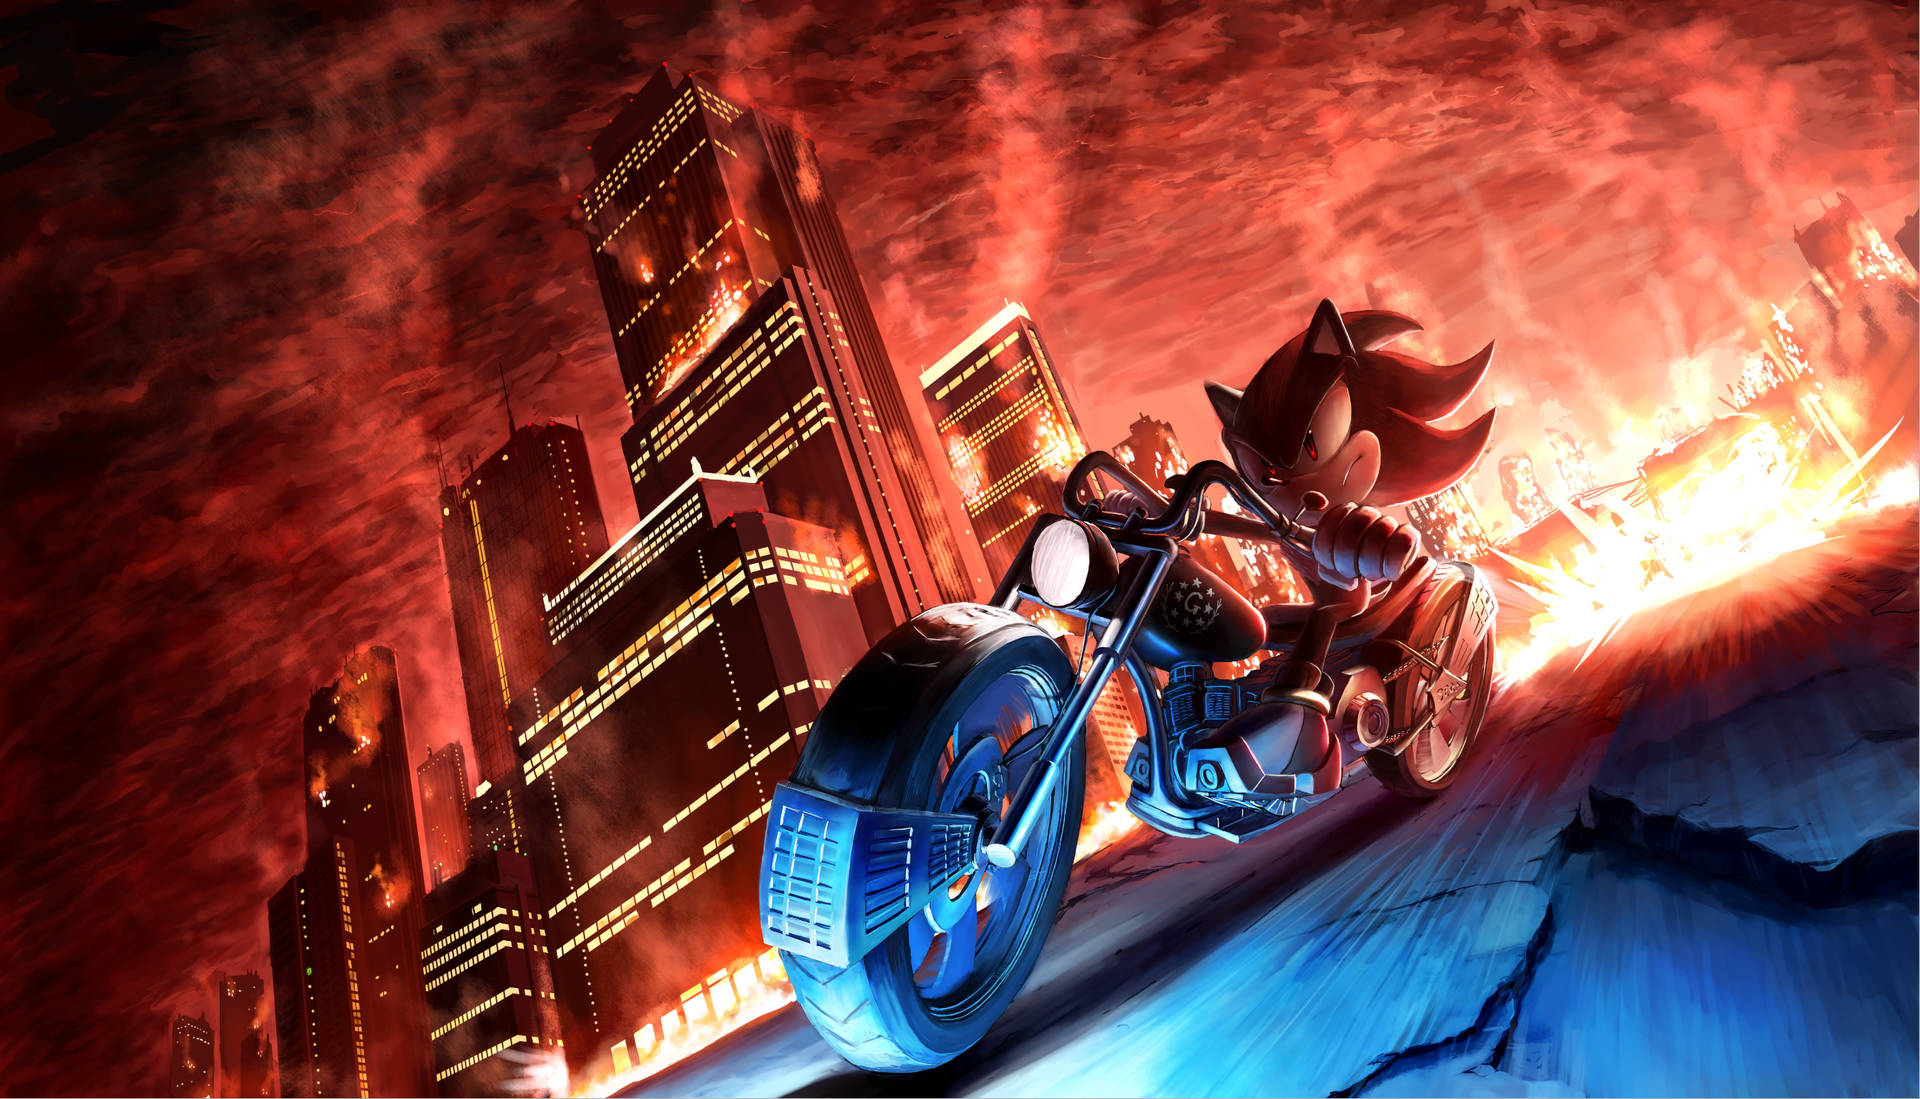 Evil Sonic The Hedgehog Riding A Motorcycle